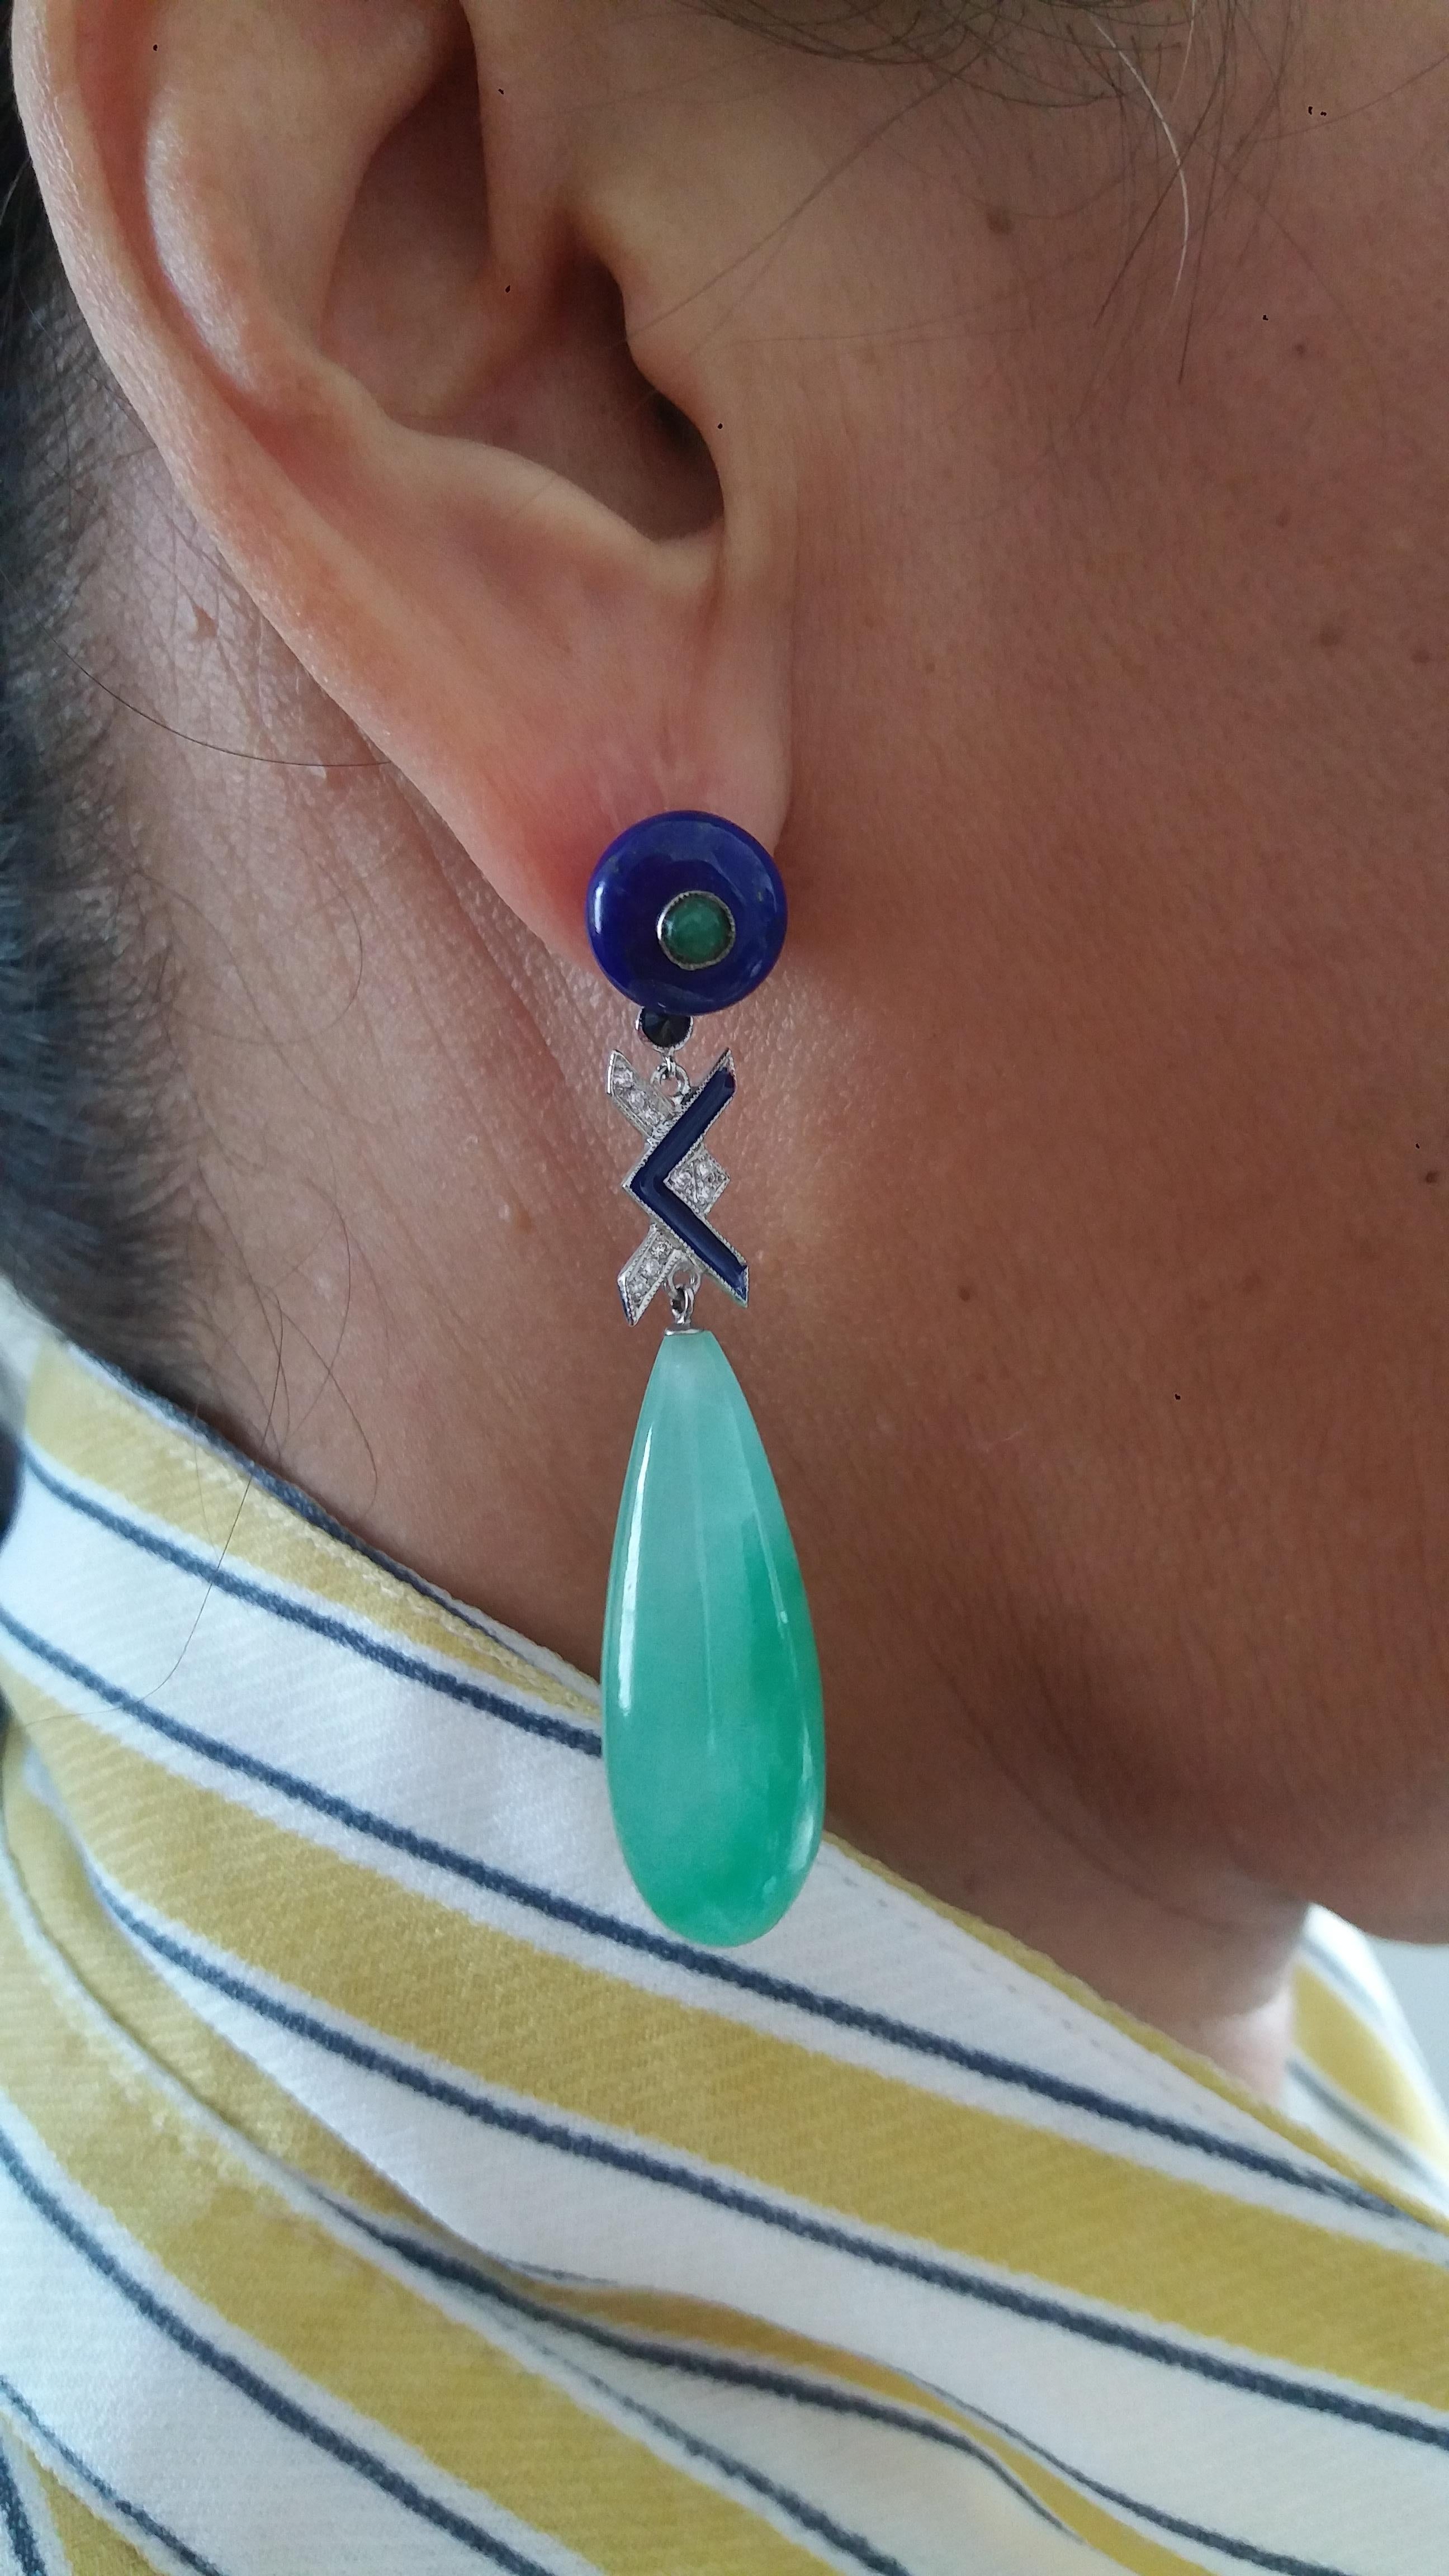 Tops are 2 round Lapis Lazuli buttons with small round emerald cabs in the center,middle part in White Gold Small Full Cut Diamonds and Blue Enamel,bottom parts are 2 big Jade round drops
In 1978 our workshop started in Italy to make simple-chic Art